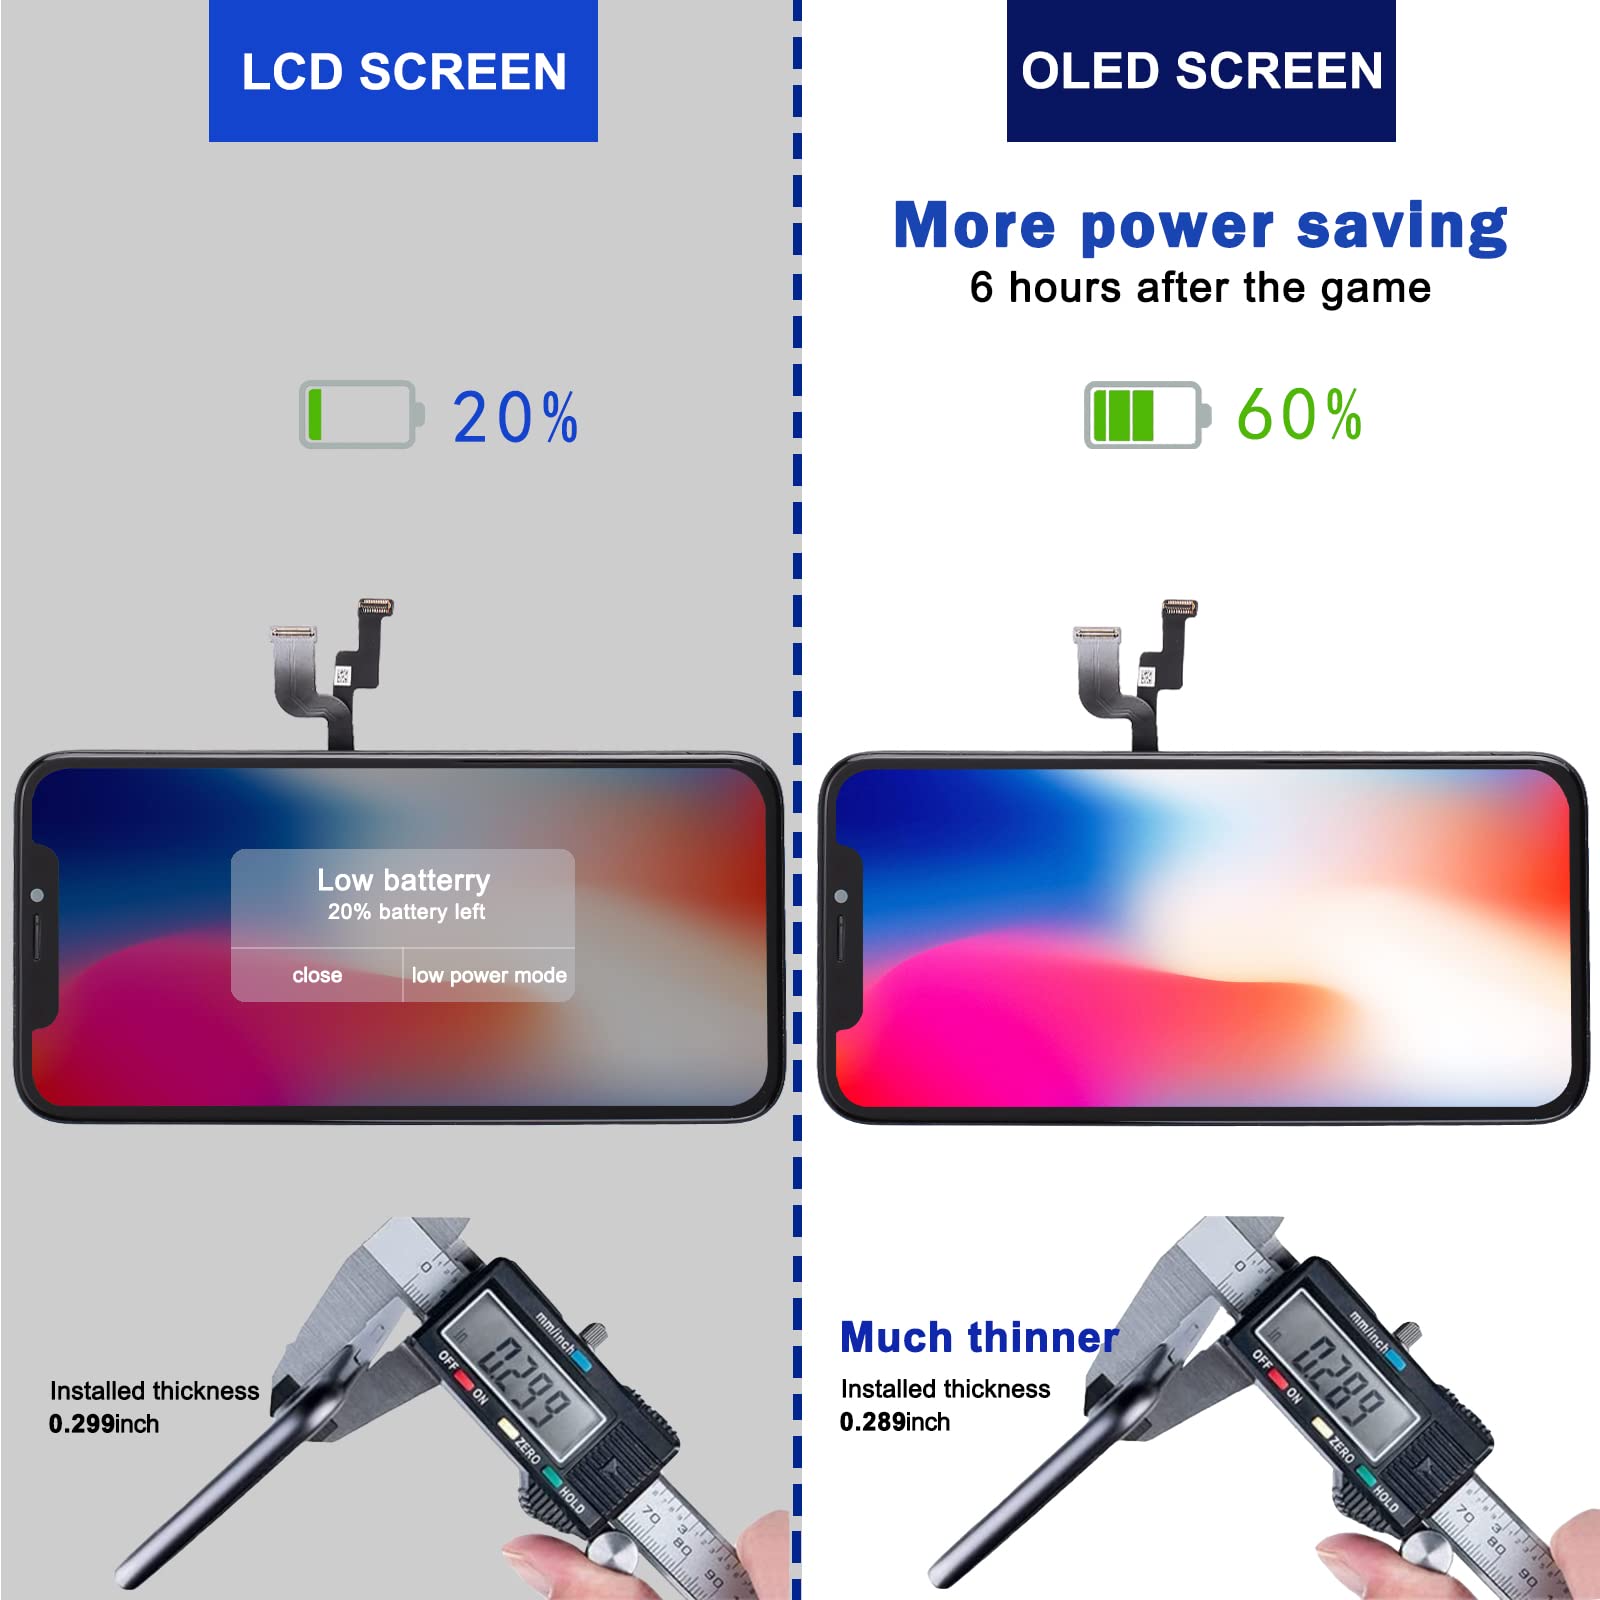 CCXSY OLED Display Screen Replacement for iPhone Xs, 3D Touch 5.8 Inch Screen Digitizer Full Assembly for Model A1920/A2097/A2098/A2099/A2100